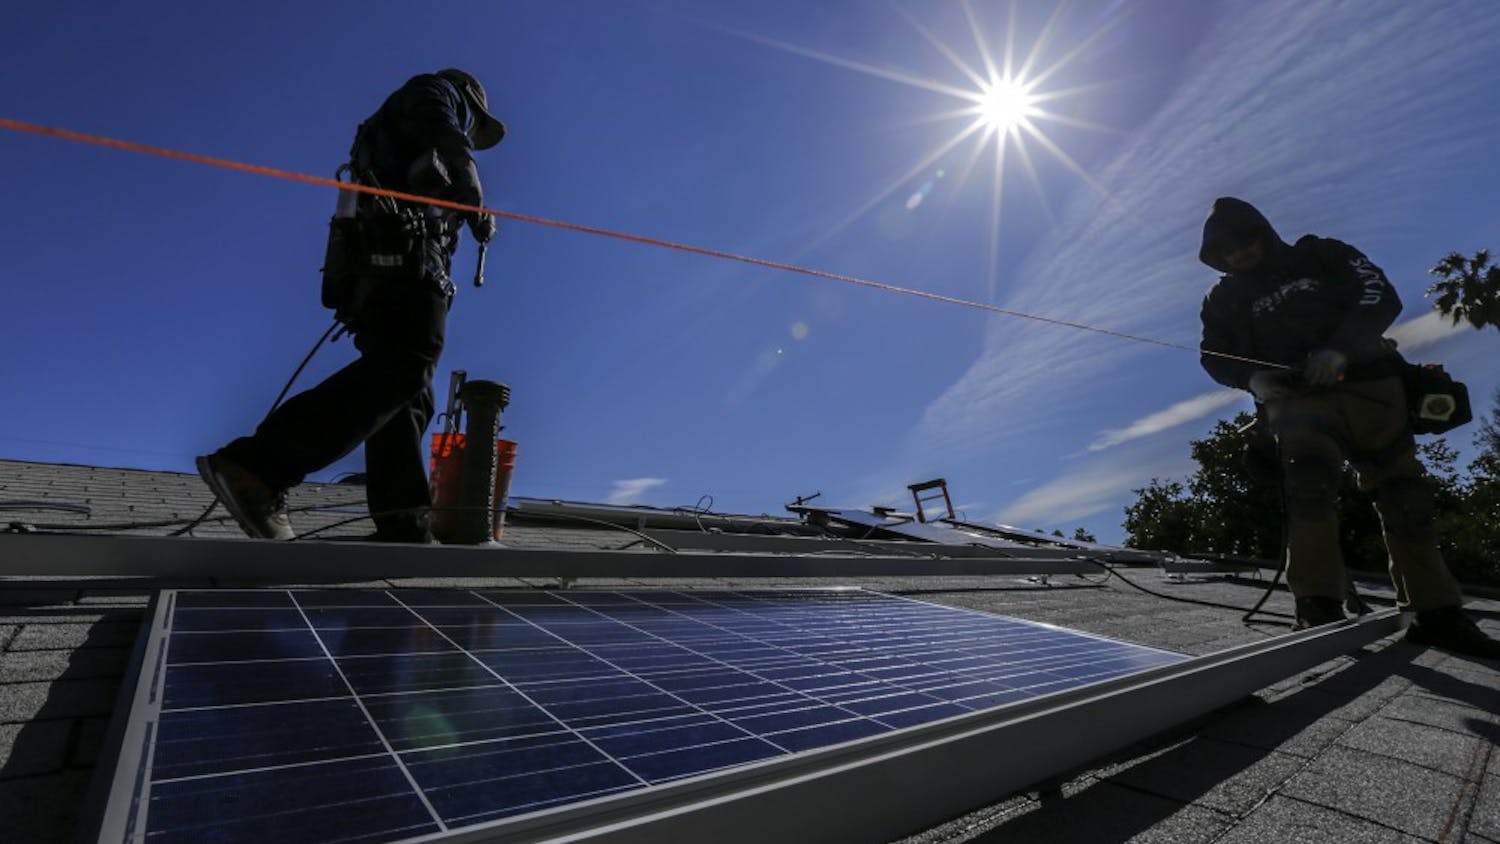 A crew installs solar panels on a home in Los Angeles in February 2016. (Irfan Khan/Los Angeles Times/TNS)